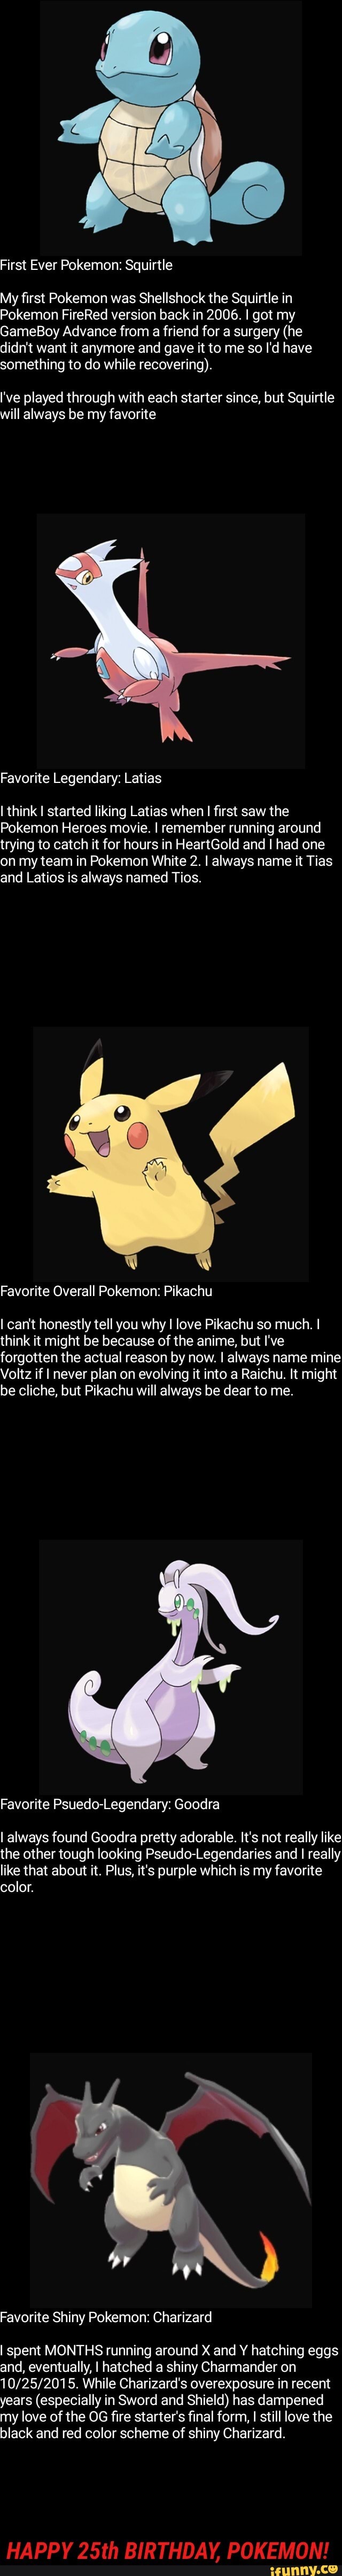 A meme using a blackened version of Pikachu, one the main